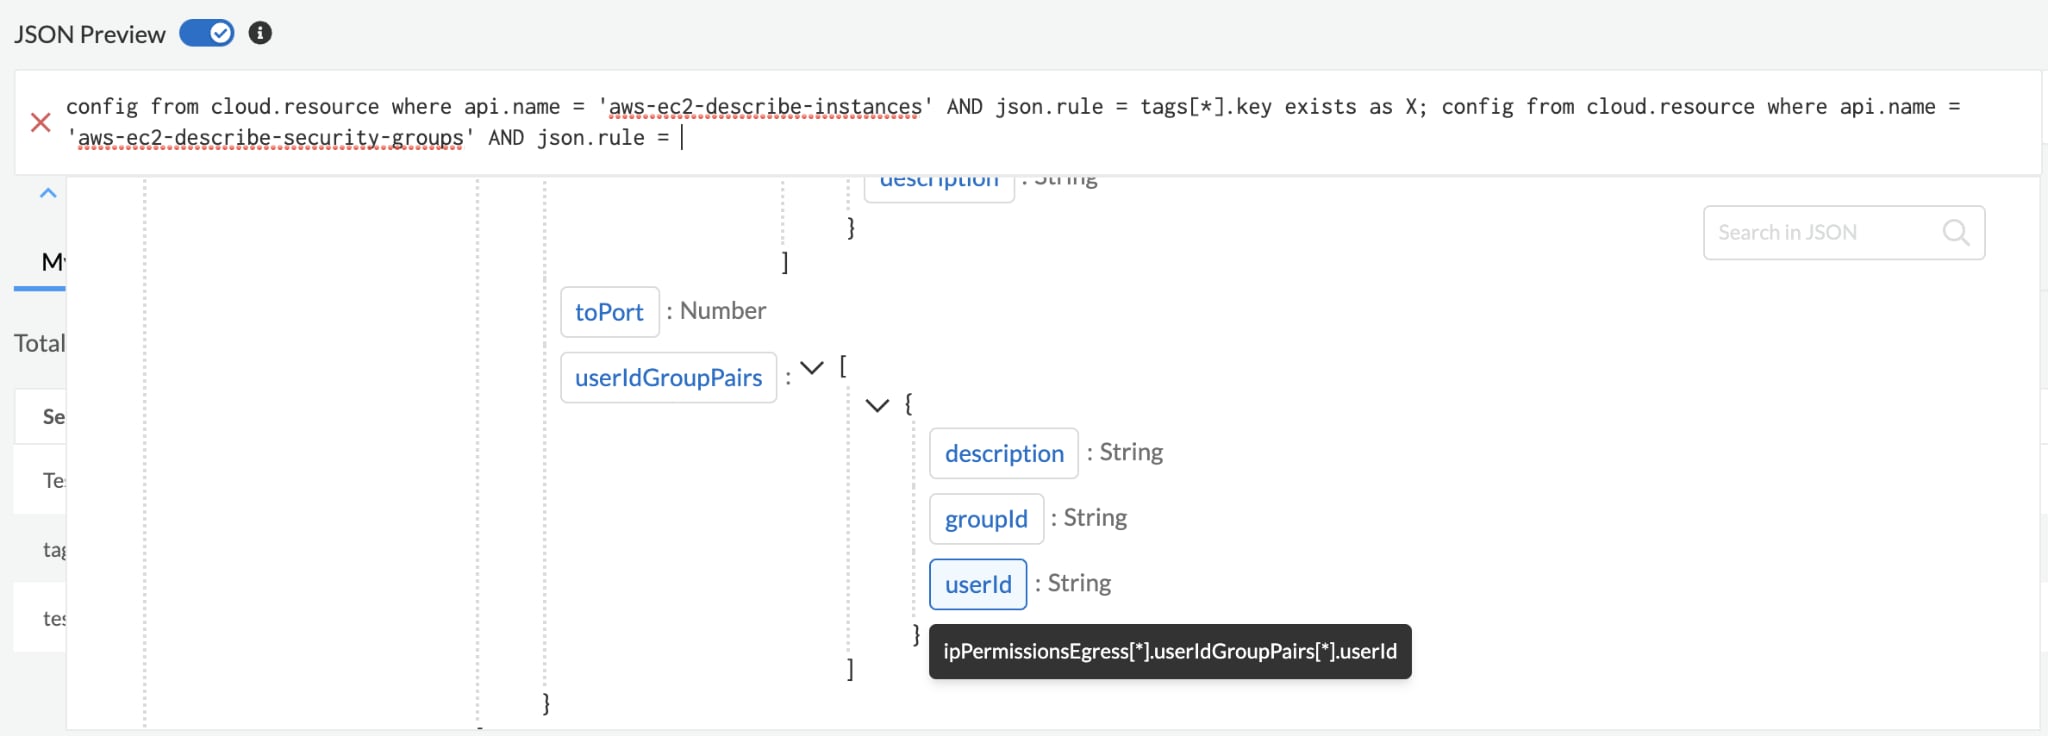 The JSON Preview is context-aware and works for multi-API join queries.